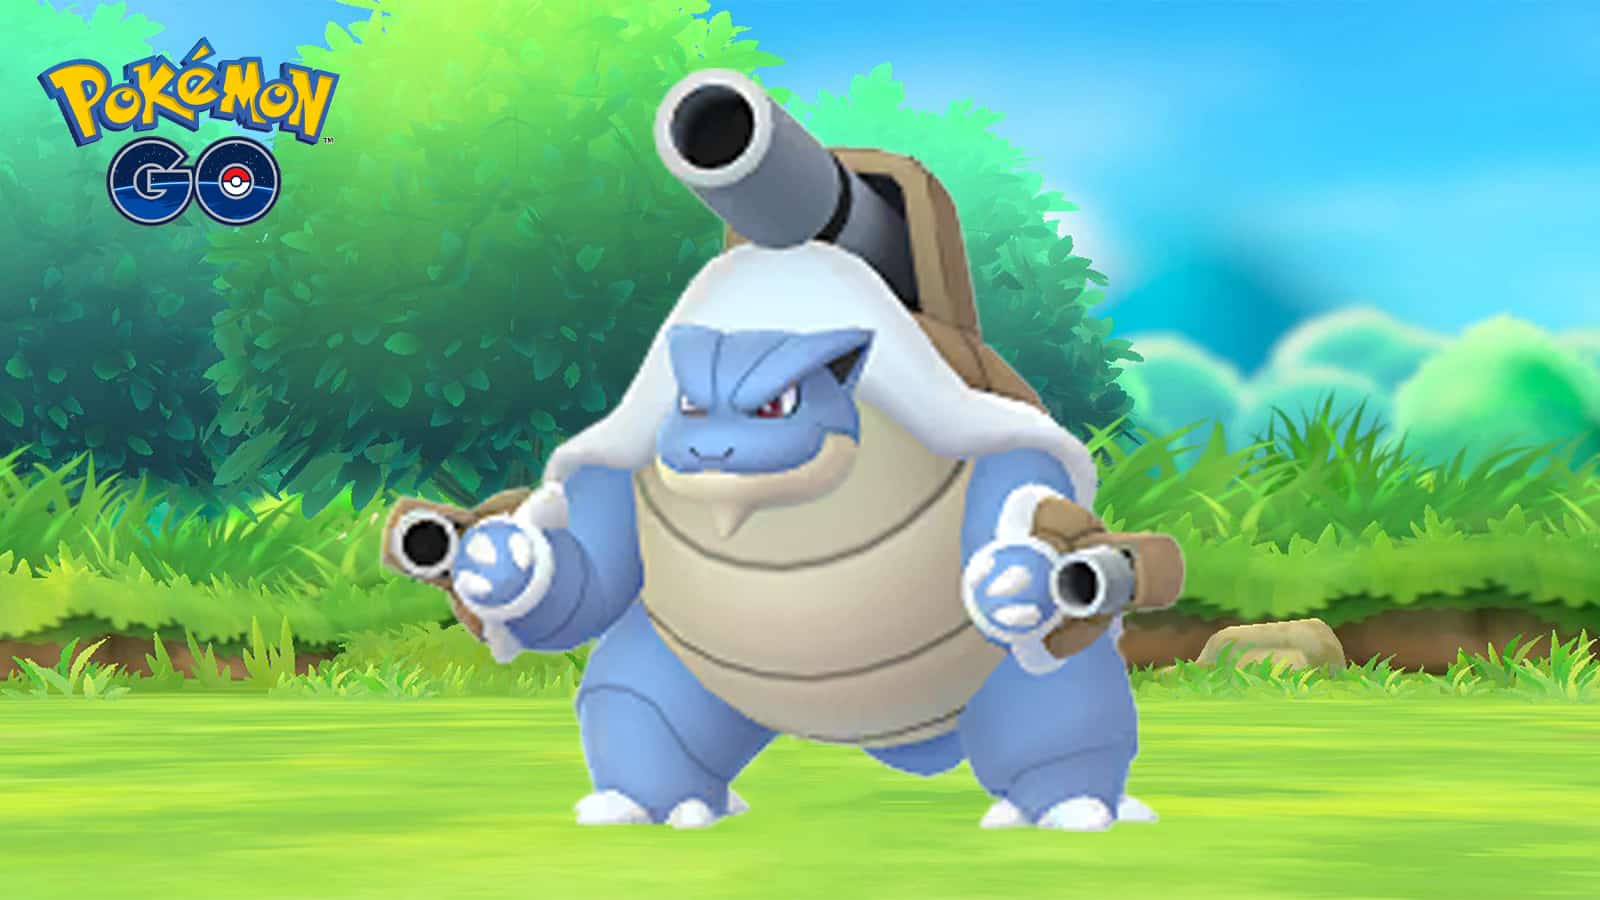 Mega Blastoise appearing in Pokemon Go with its best counters